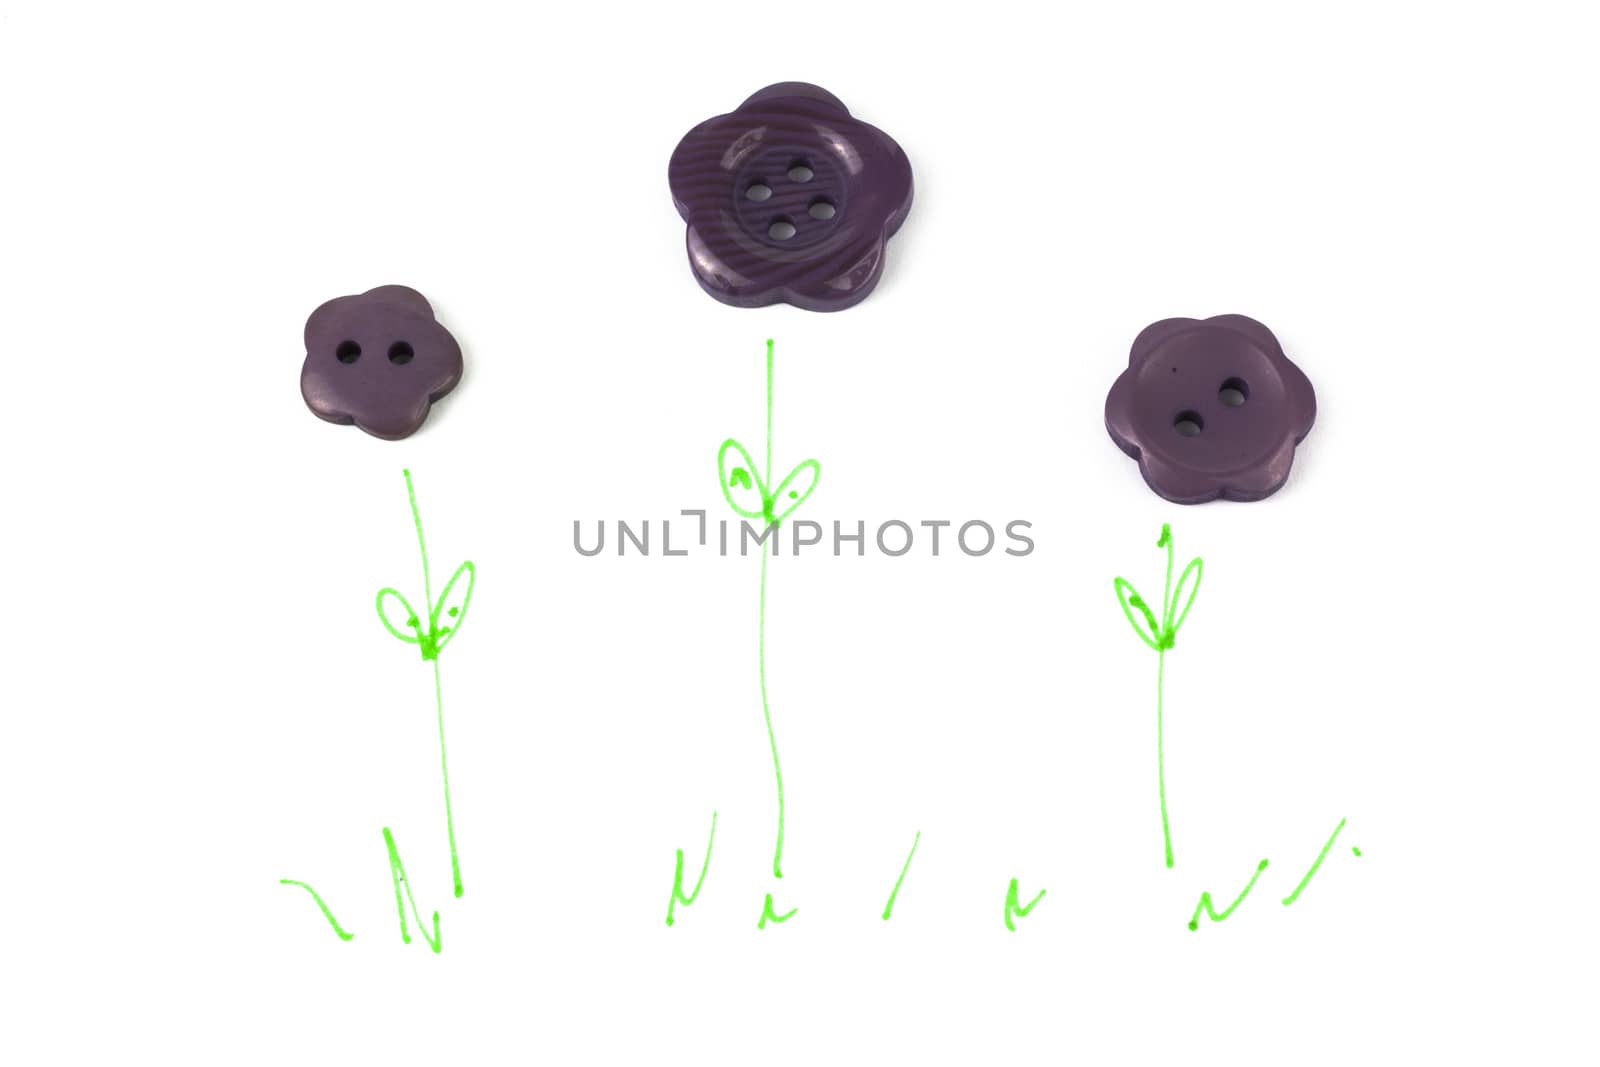 Selection selection of various purple buttons by christopherhall